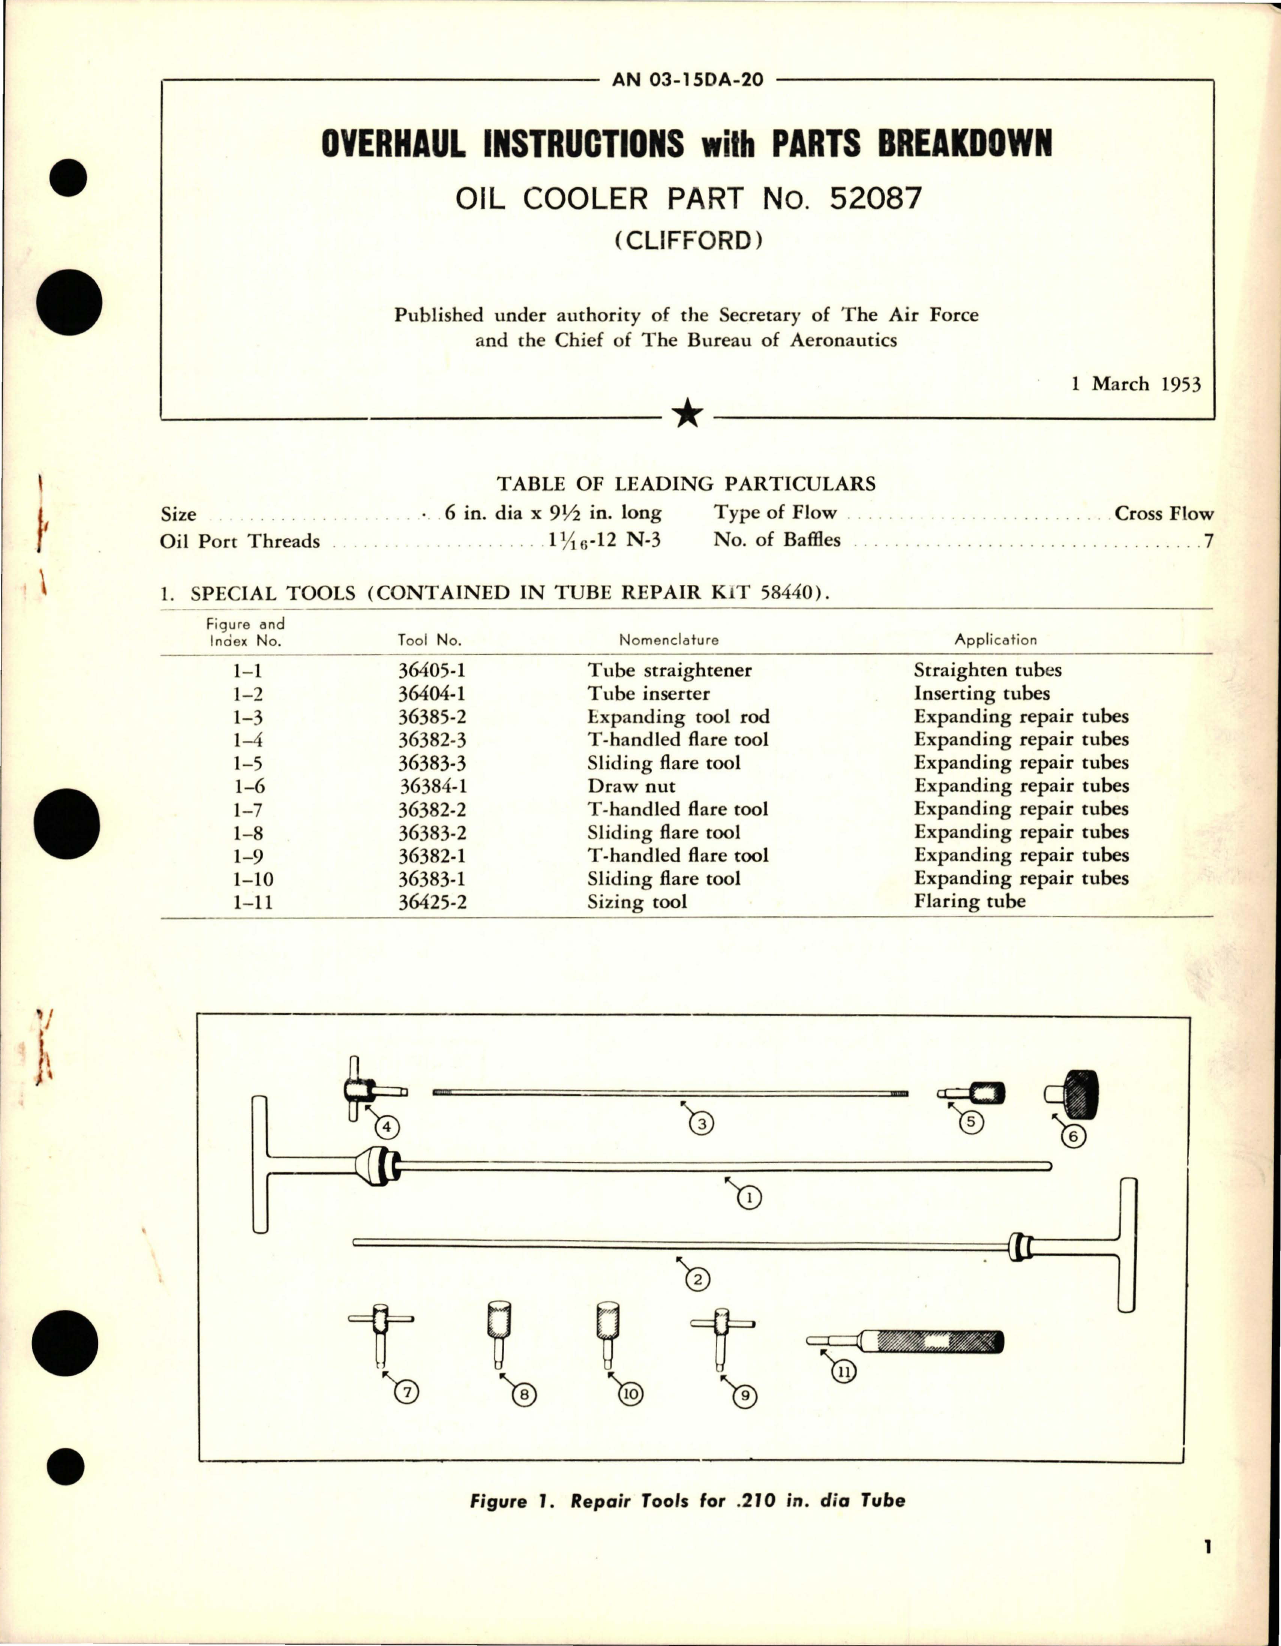 Sample page 1 from AirCorps Library document: Overhaul Instructions with Parts Breakdown for Oil Cooler - Part 52087